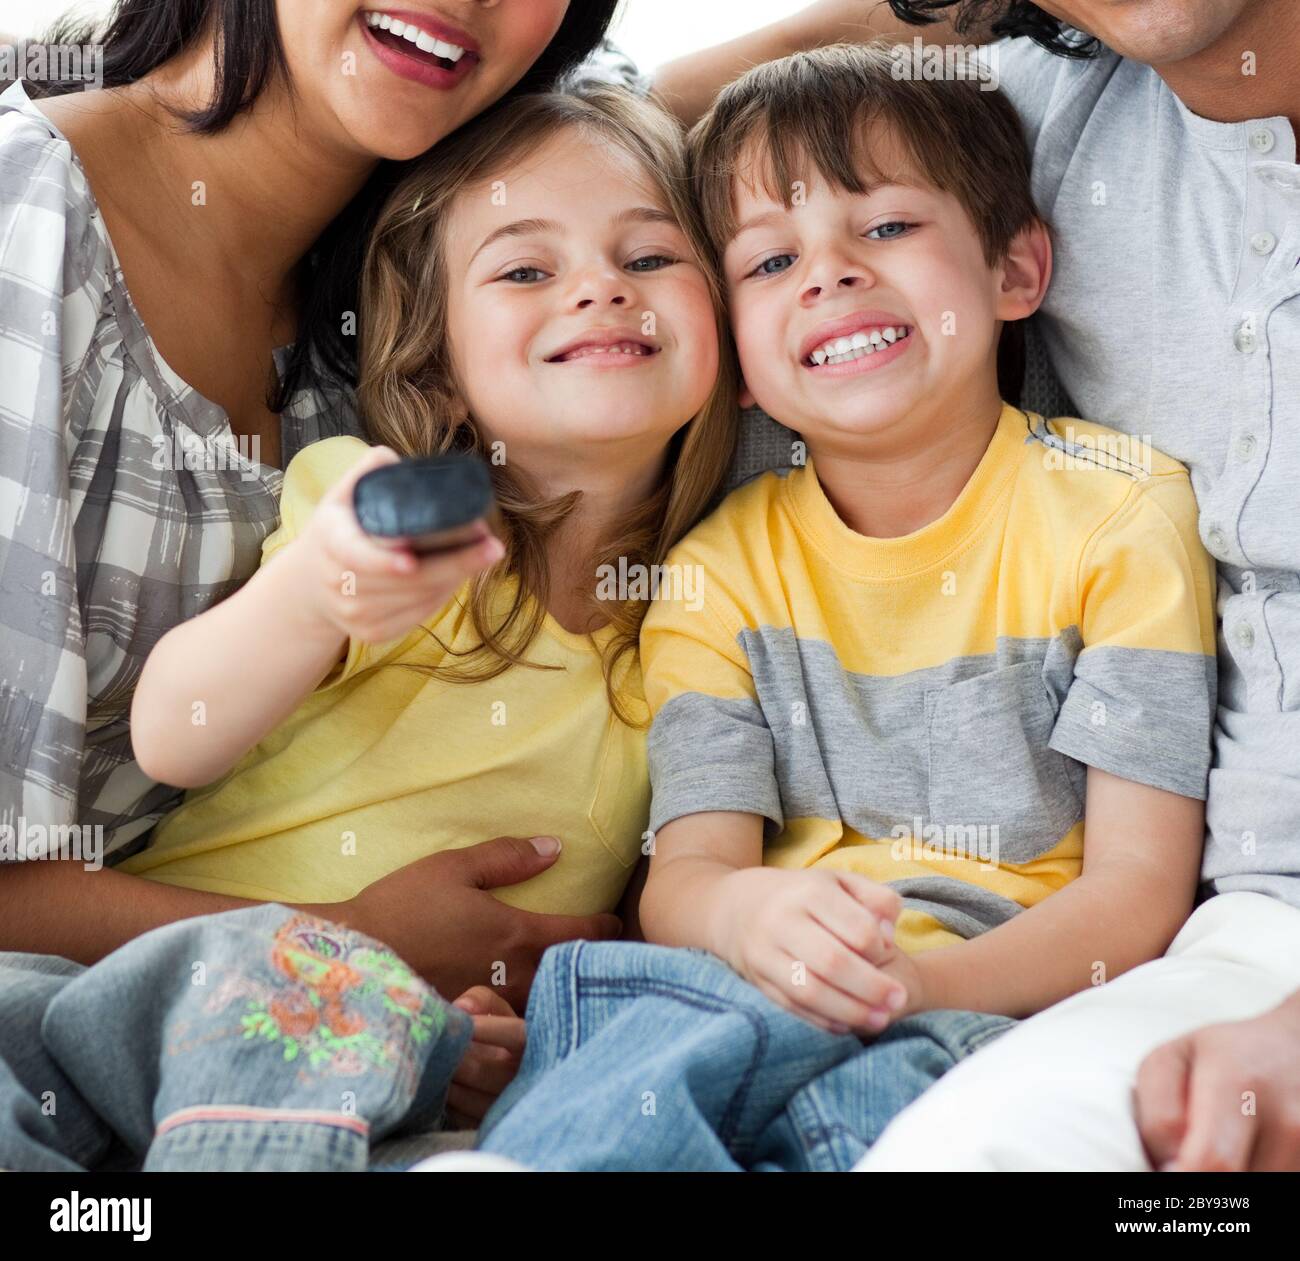 Cute children watching TV with their parents Stock Photo